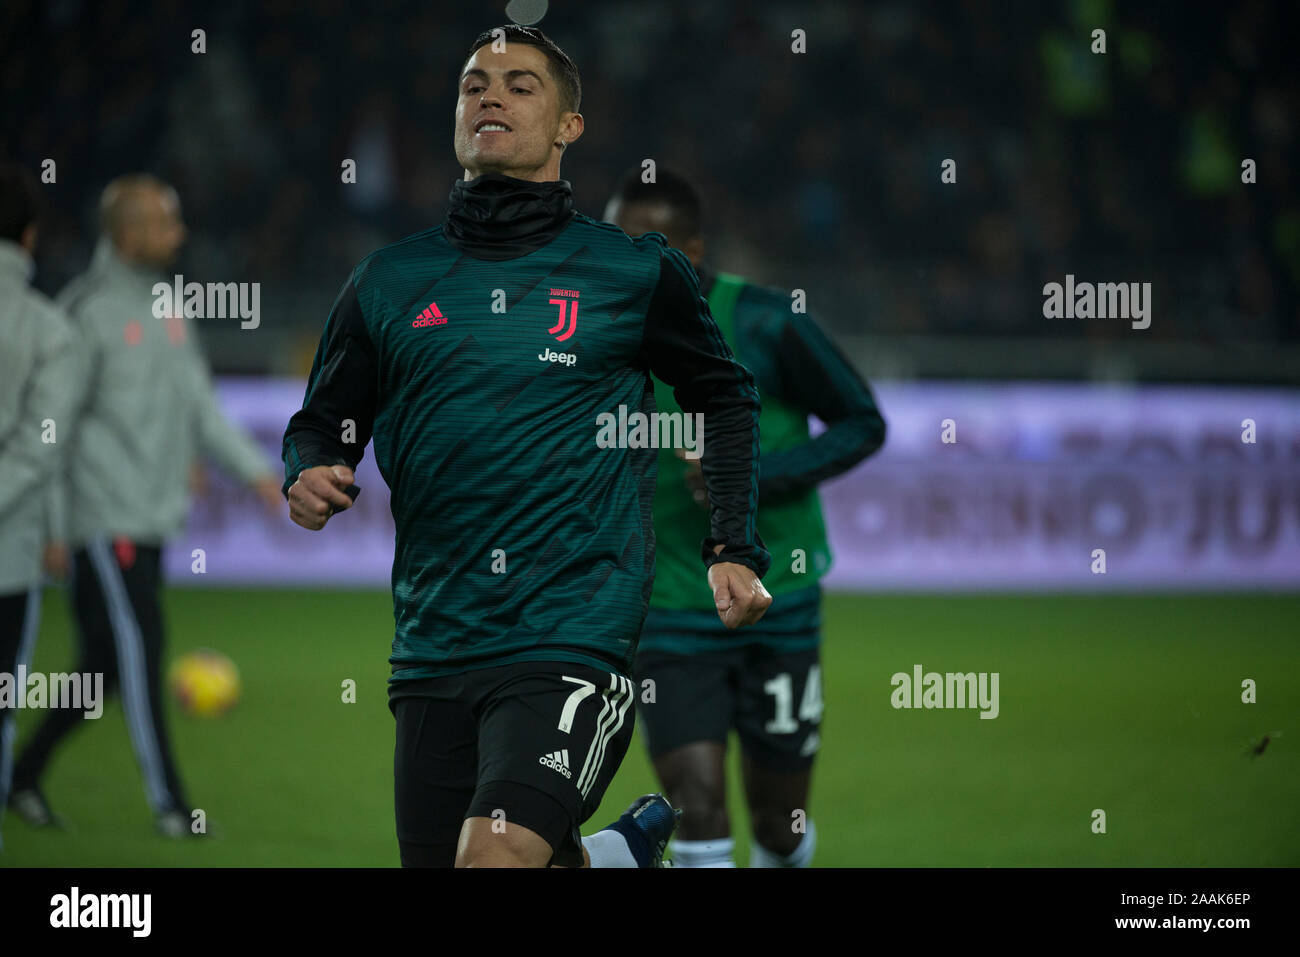 TURIN, ITALY-NOVEMBER 2, 2019: Cristiano Ronaldo during the Serie A match between Torino FC and Juventus at Stadio Olimpico in Turin, Italy Stock Photo